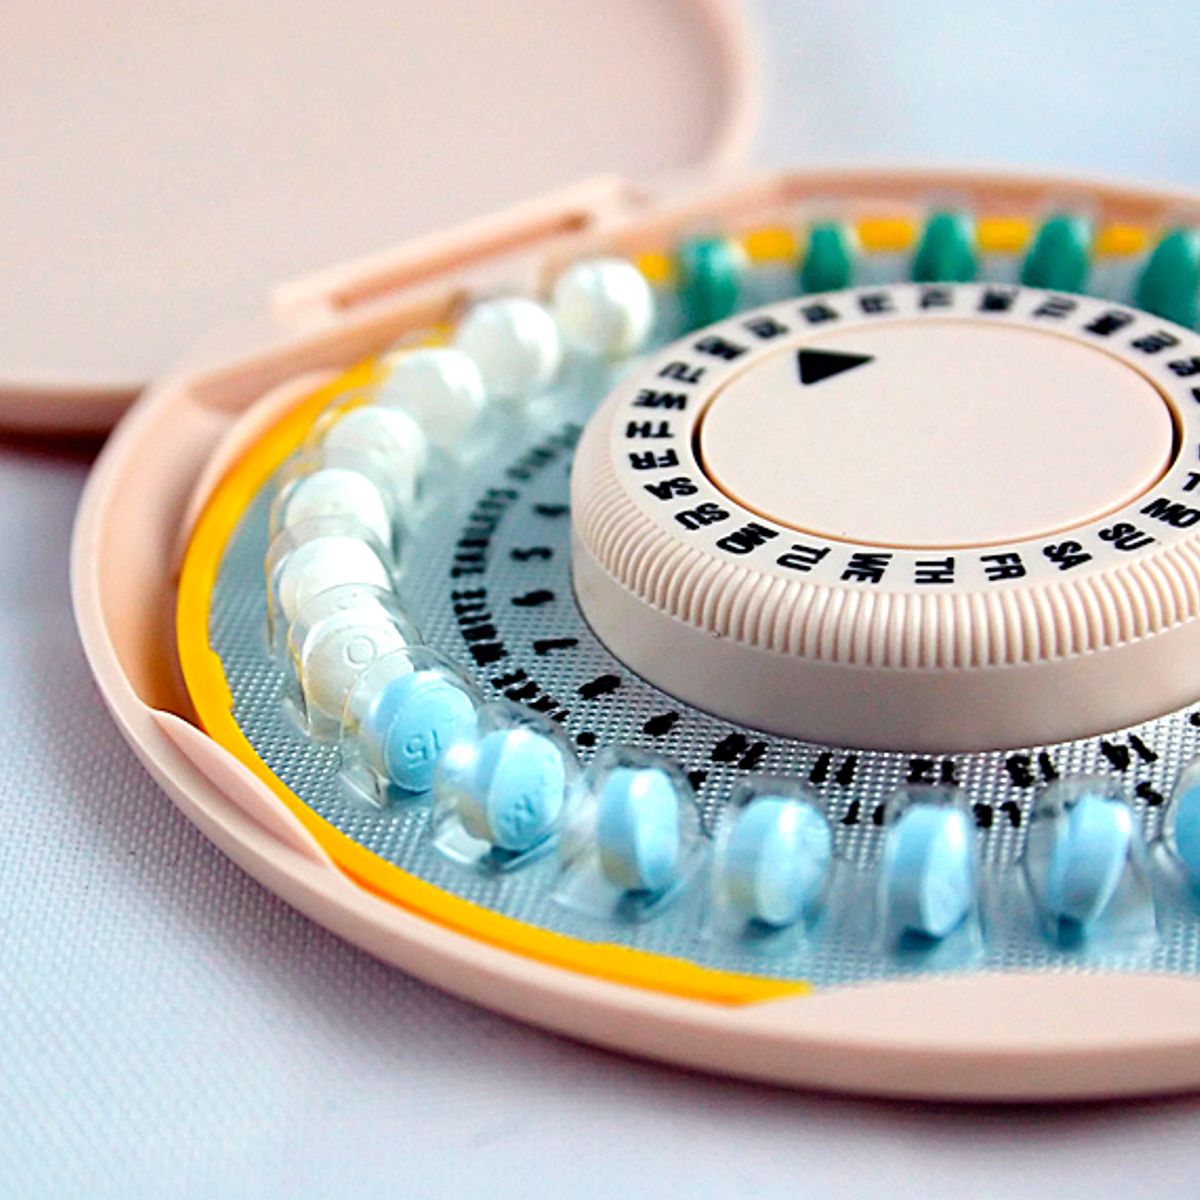 How Birth Control Pill Prescriptions By A Pharmacist Could Broaden